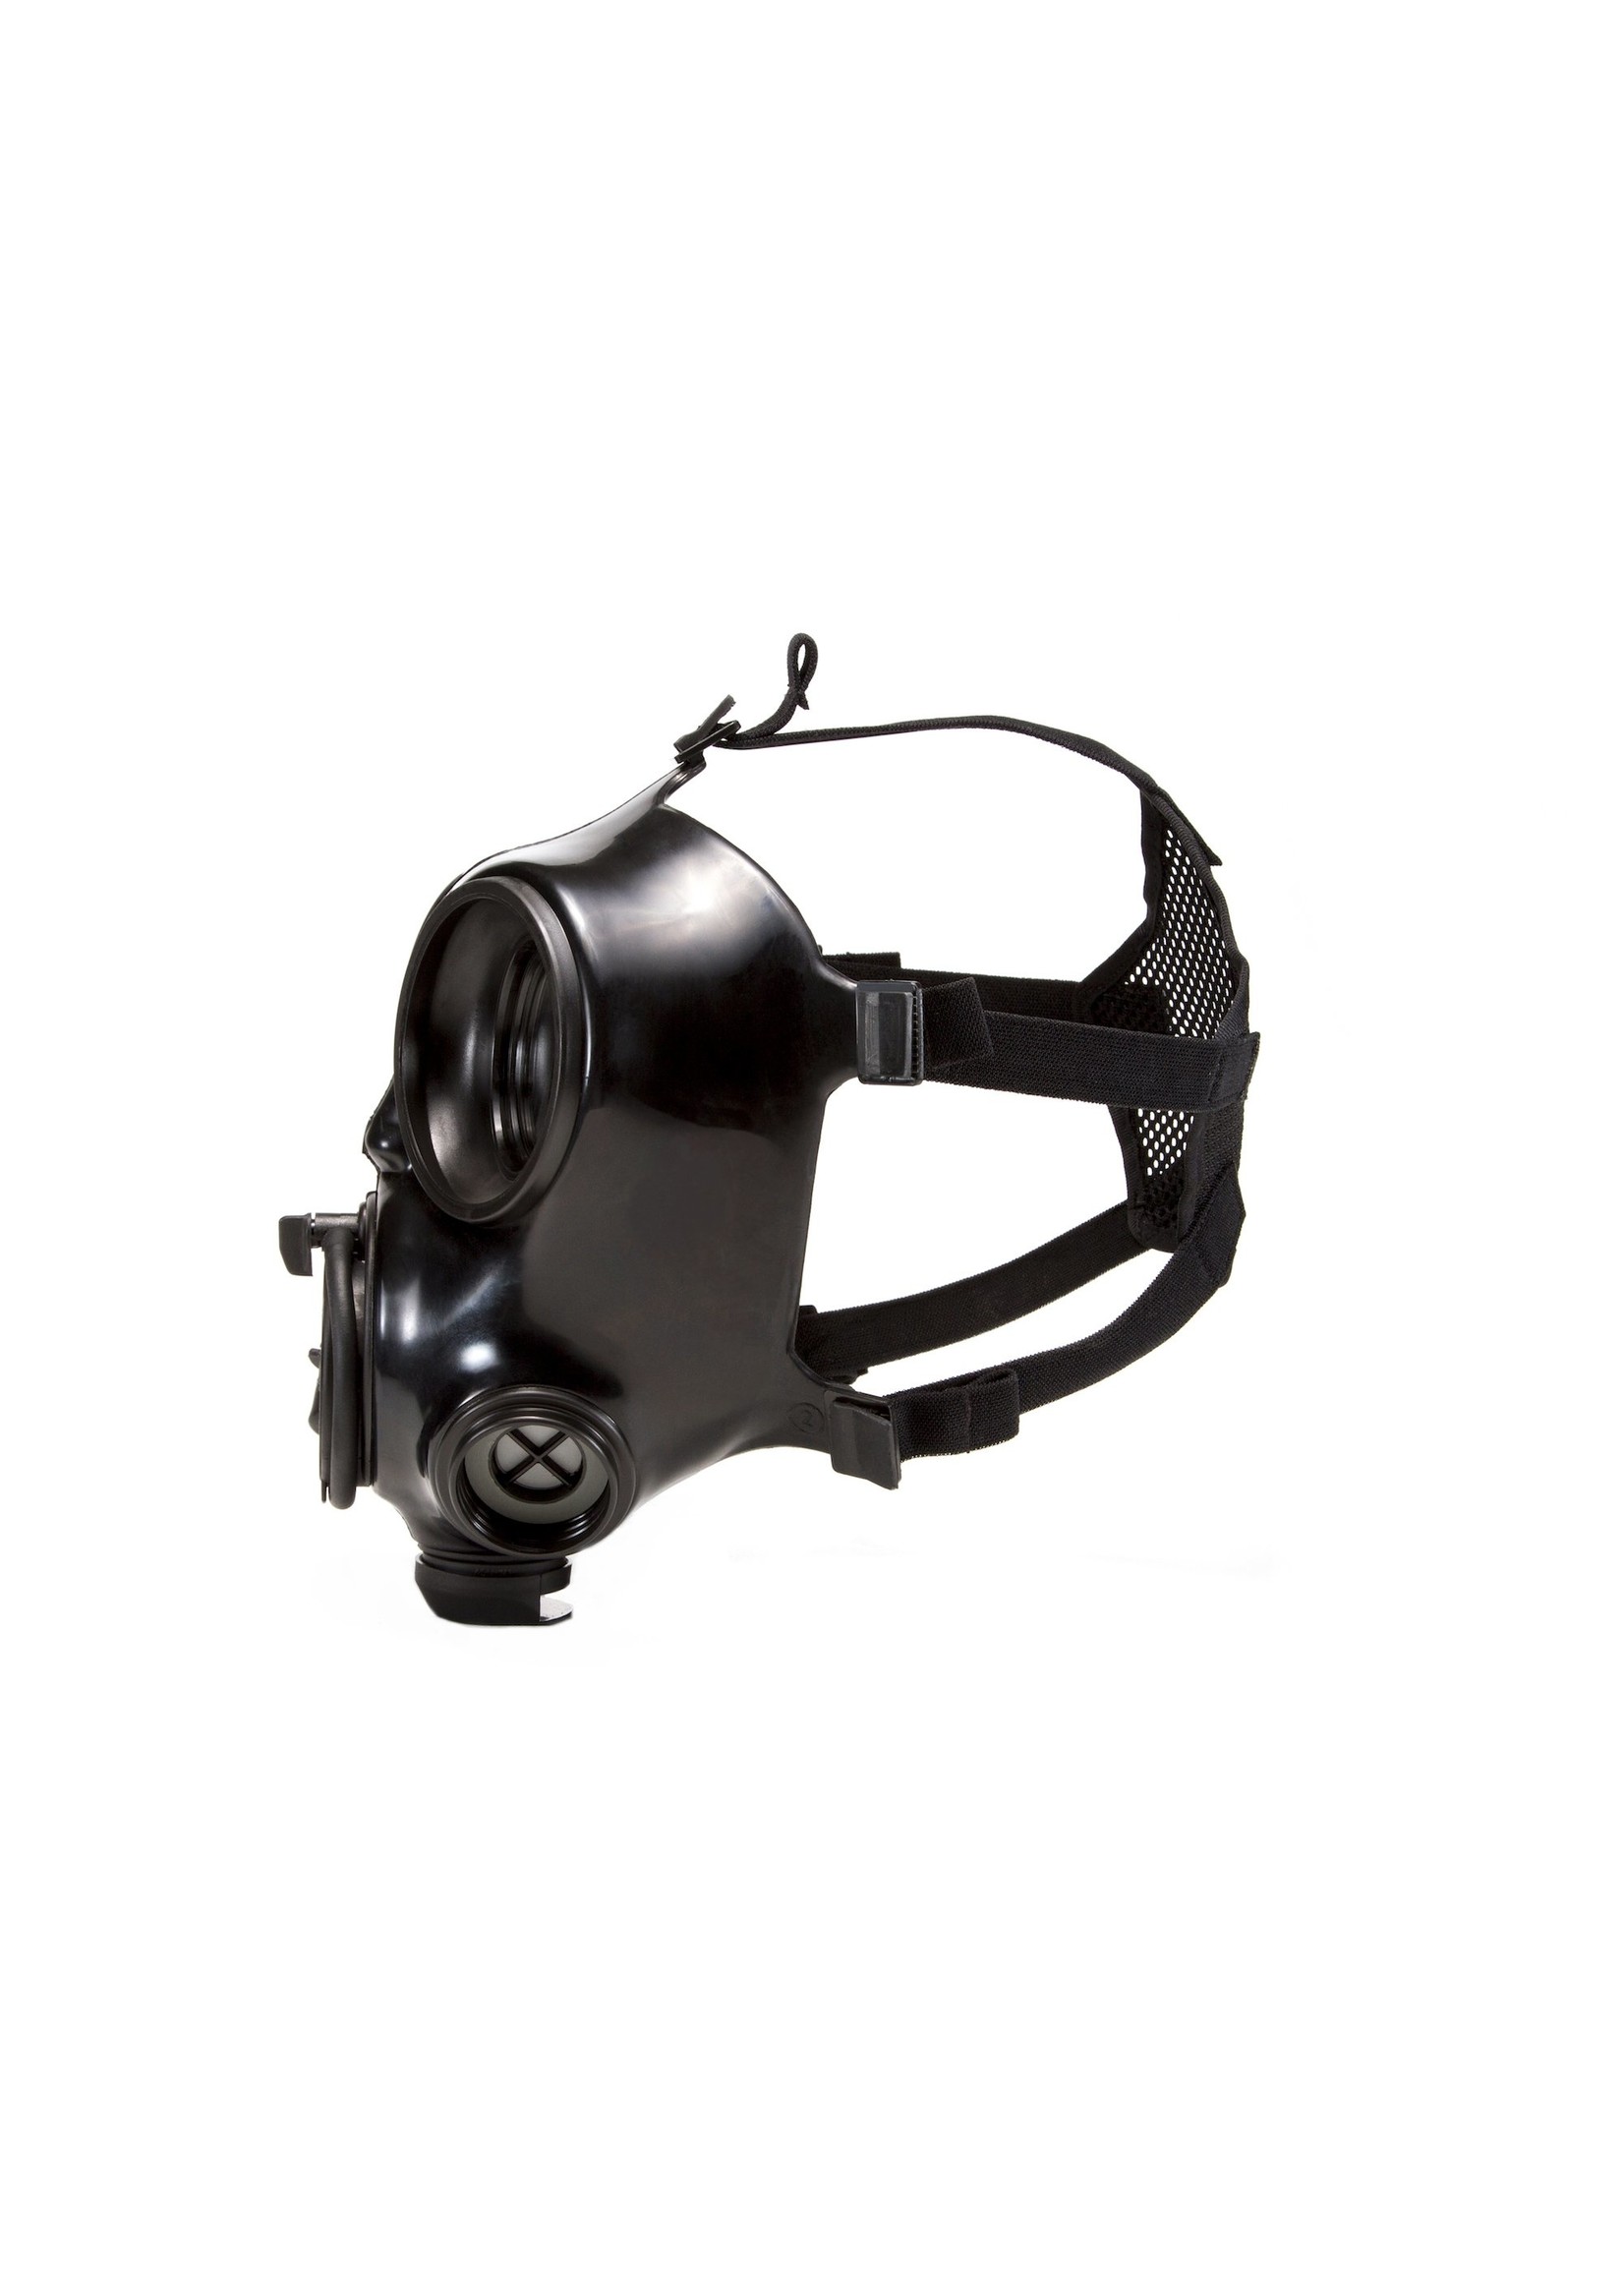 MIRA SAFETY CM-7M MILITARY GAS MASK - CBRN PROTECTION